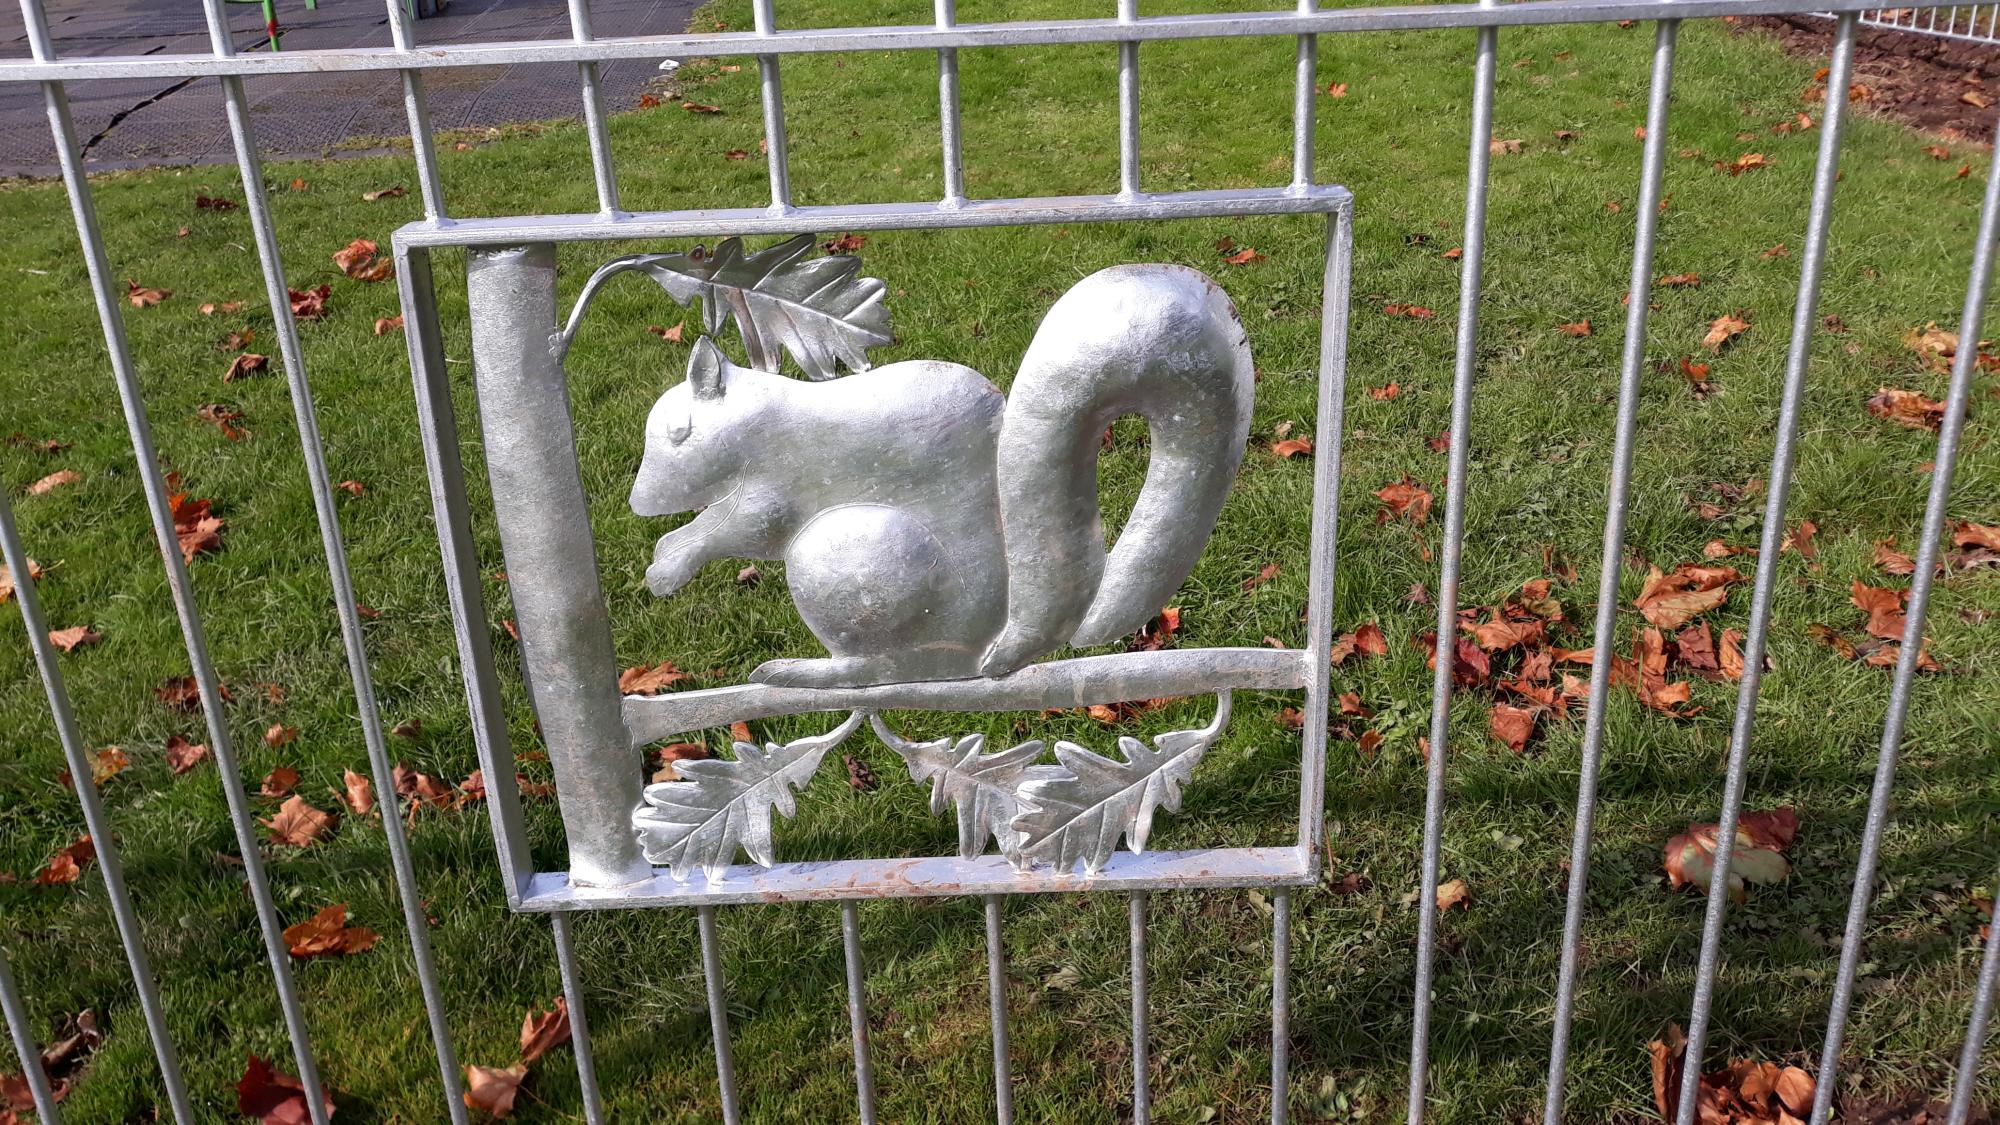 Fence with animal on it